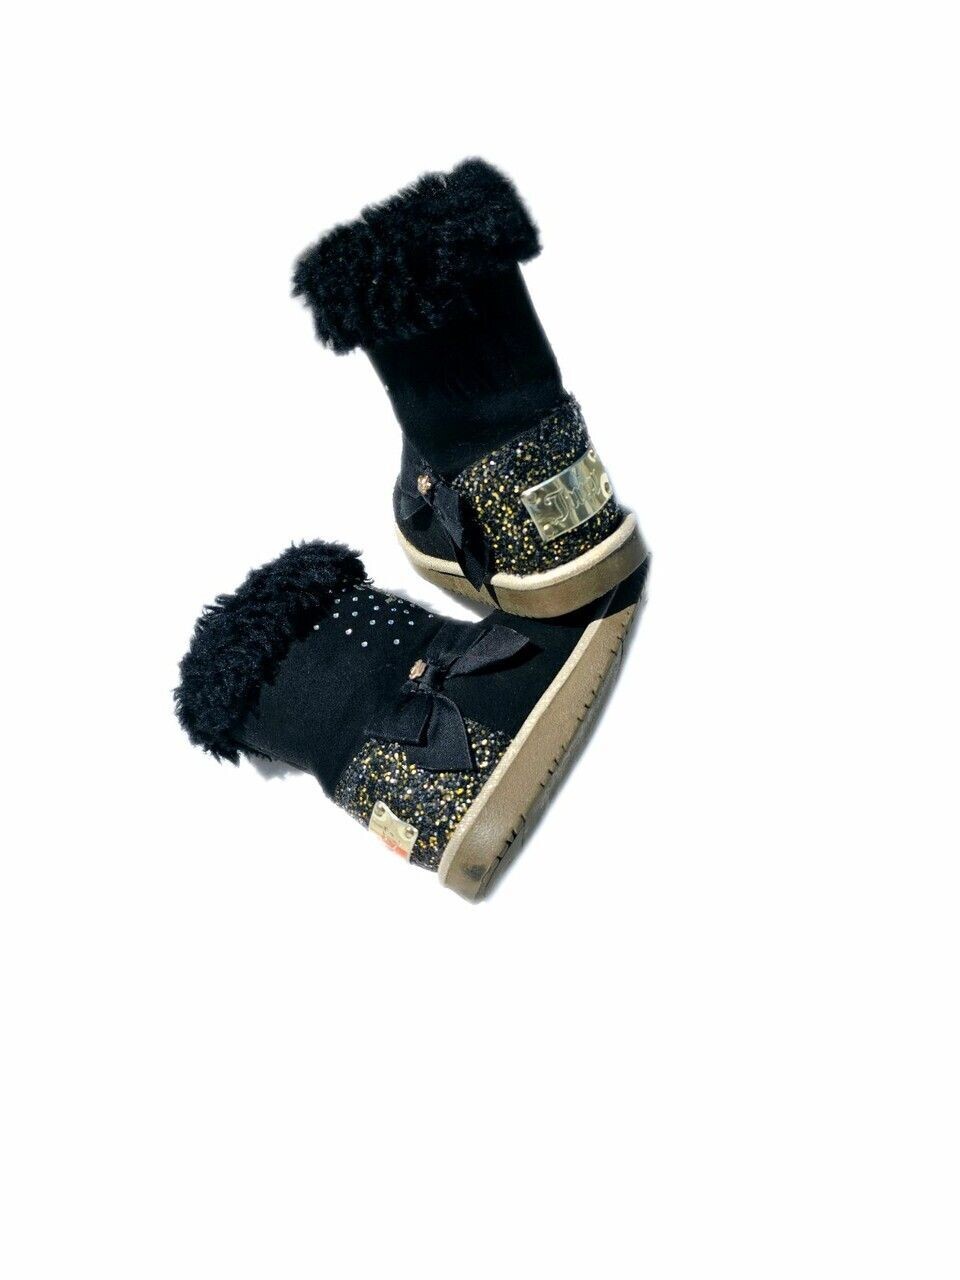 Black And Gold Juicy Couture Little Girls Boots